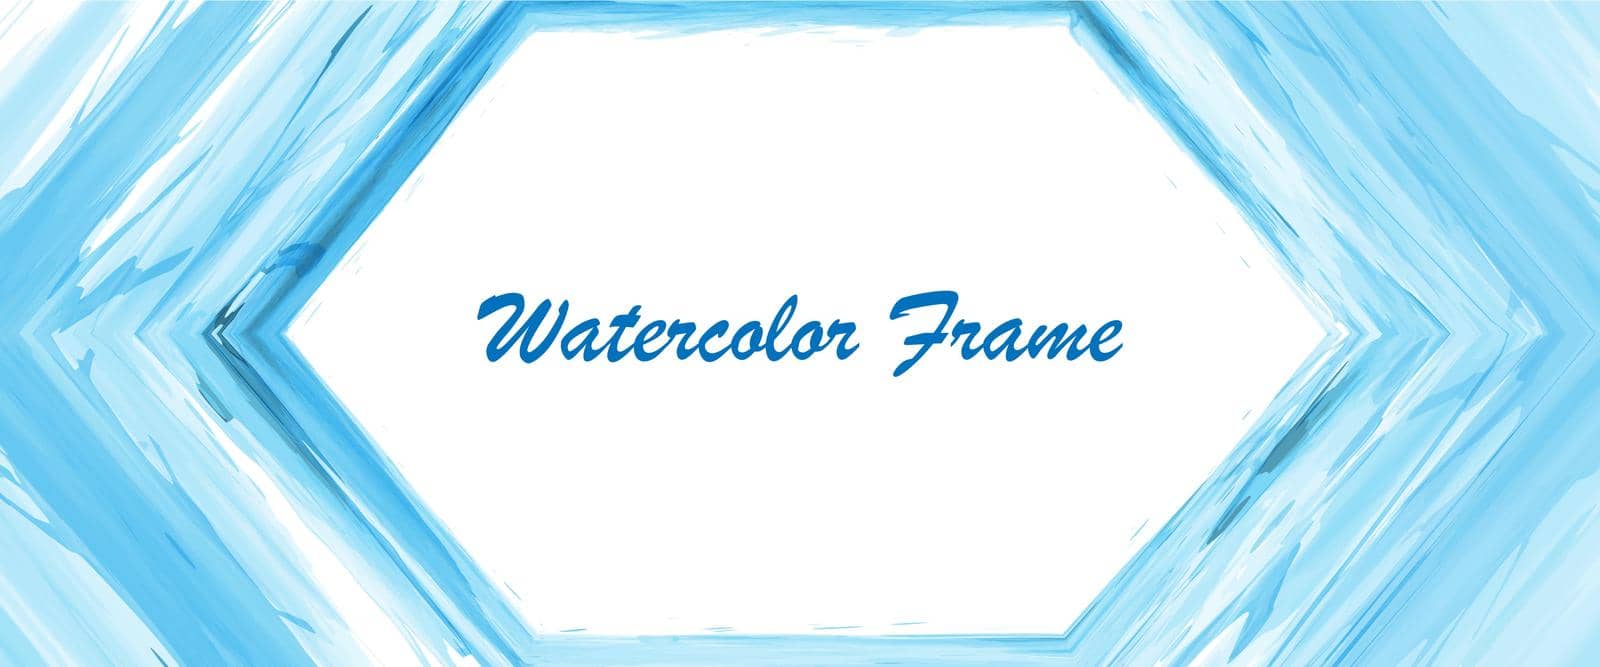 Blue watercolor background with a hexagonal frame in the center for postcards, banners, posters and creative design by Grommik